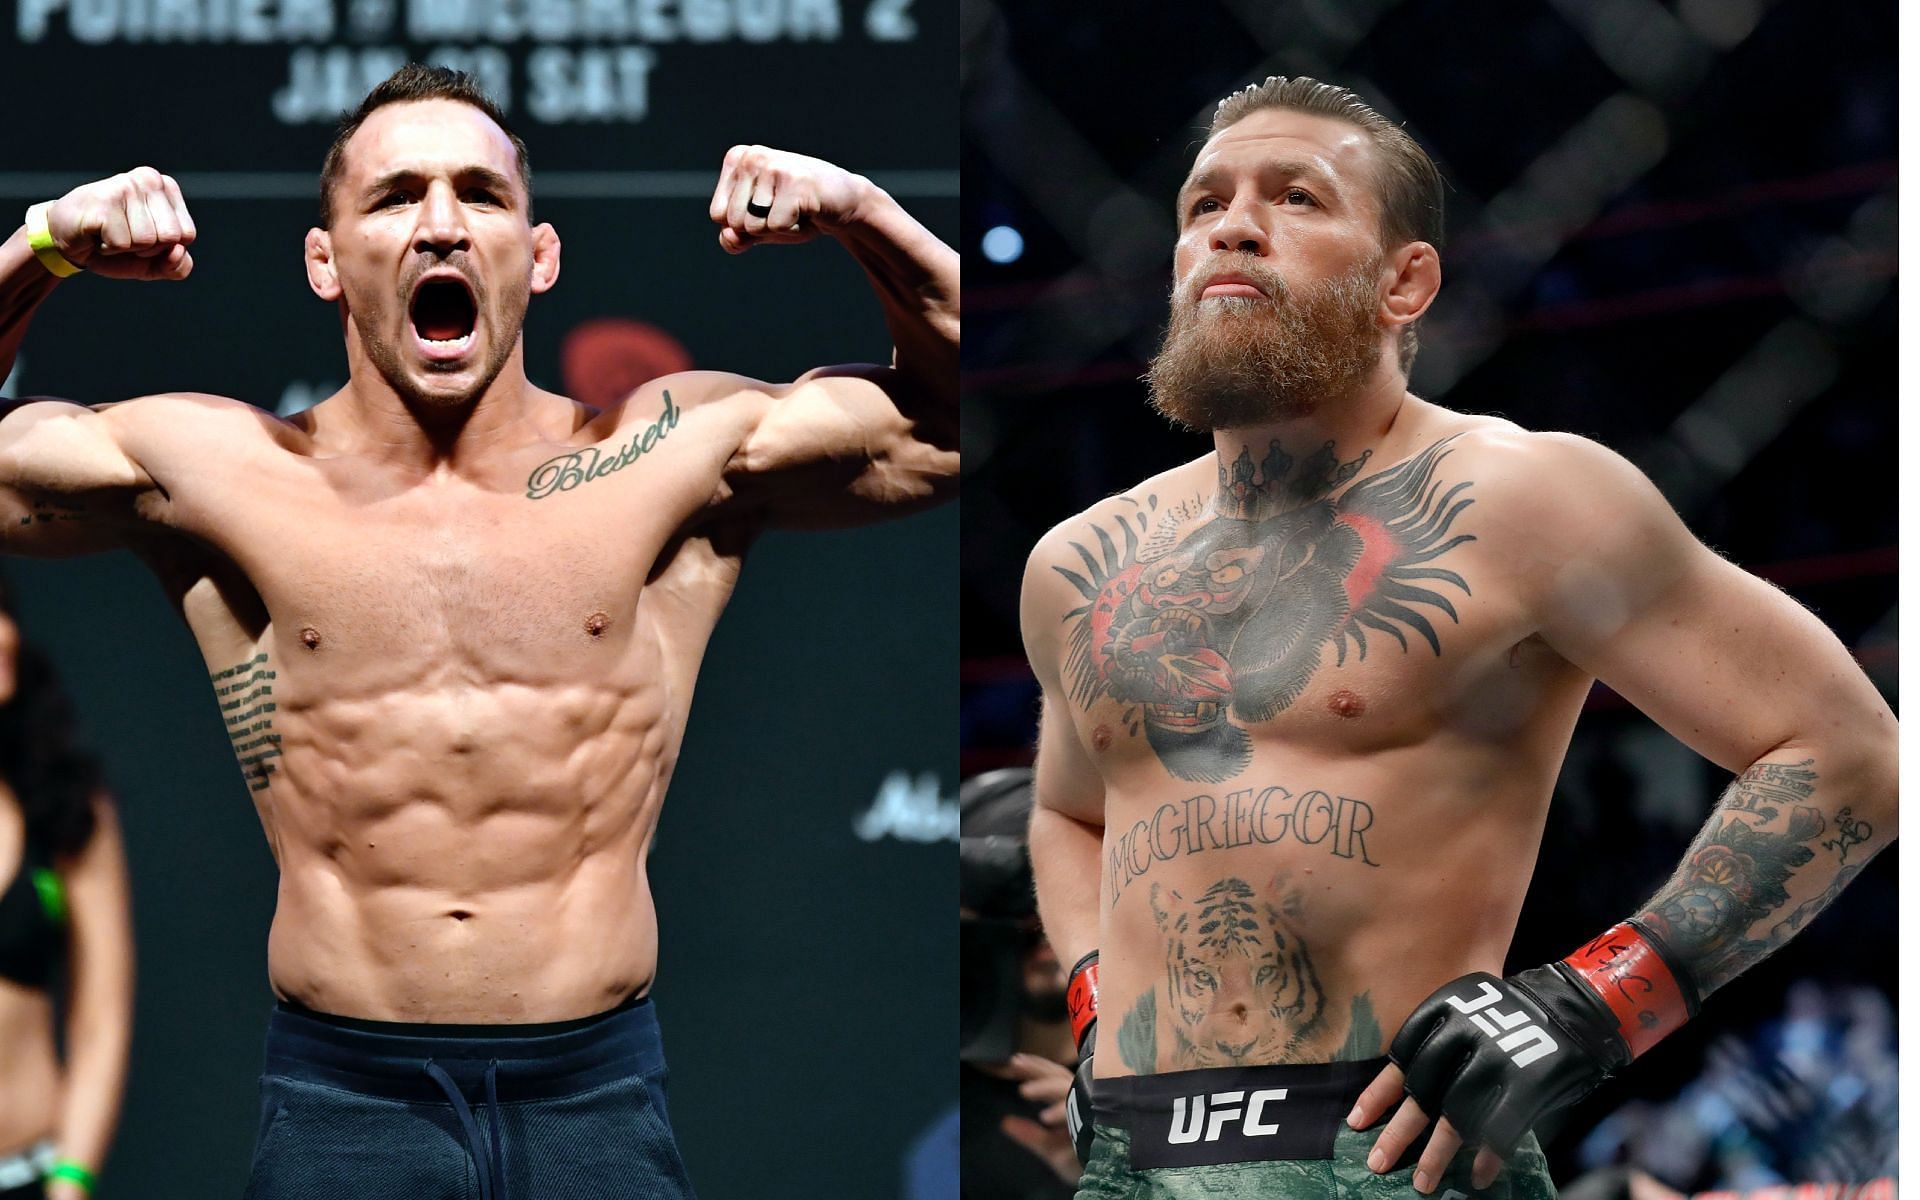 Michael Chandler (left) and Conor McGregor (right) [Image credits: Getty Images] 